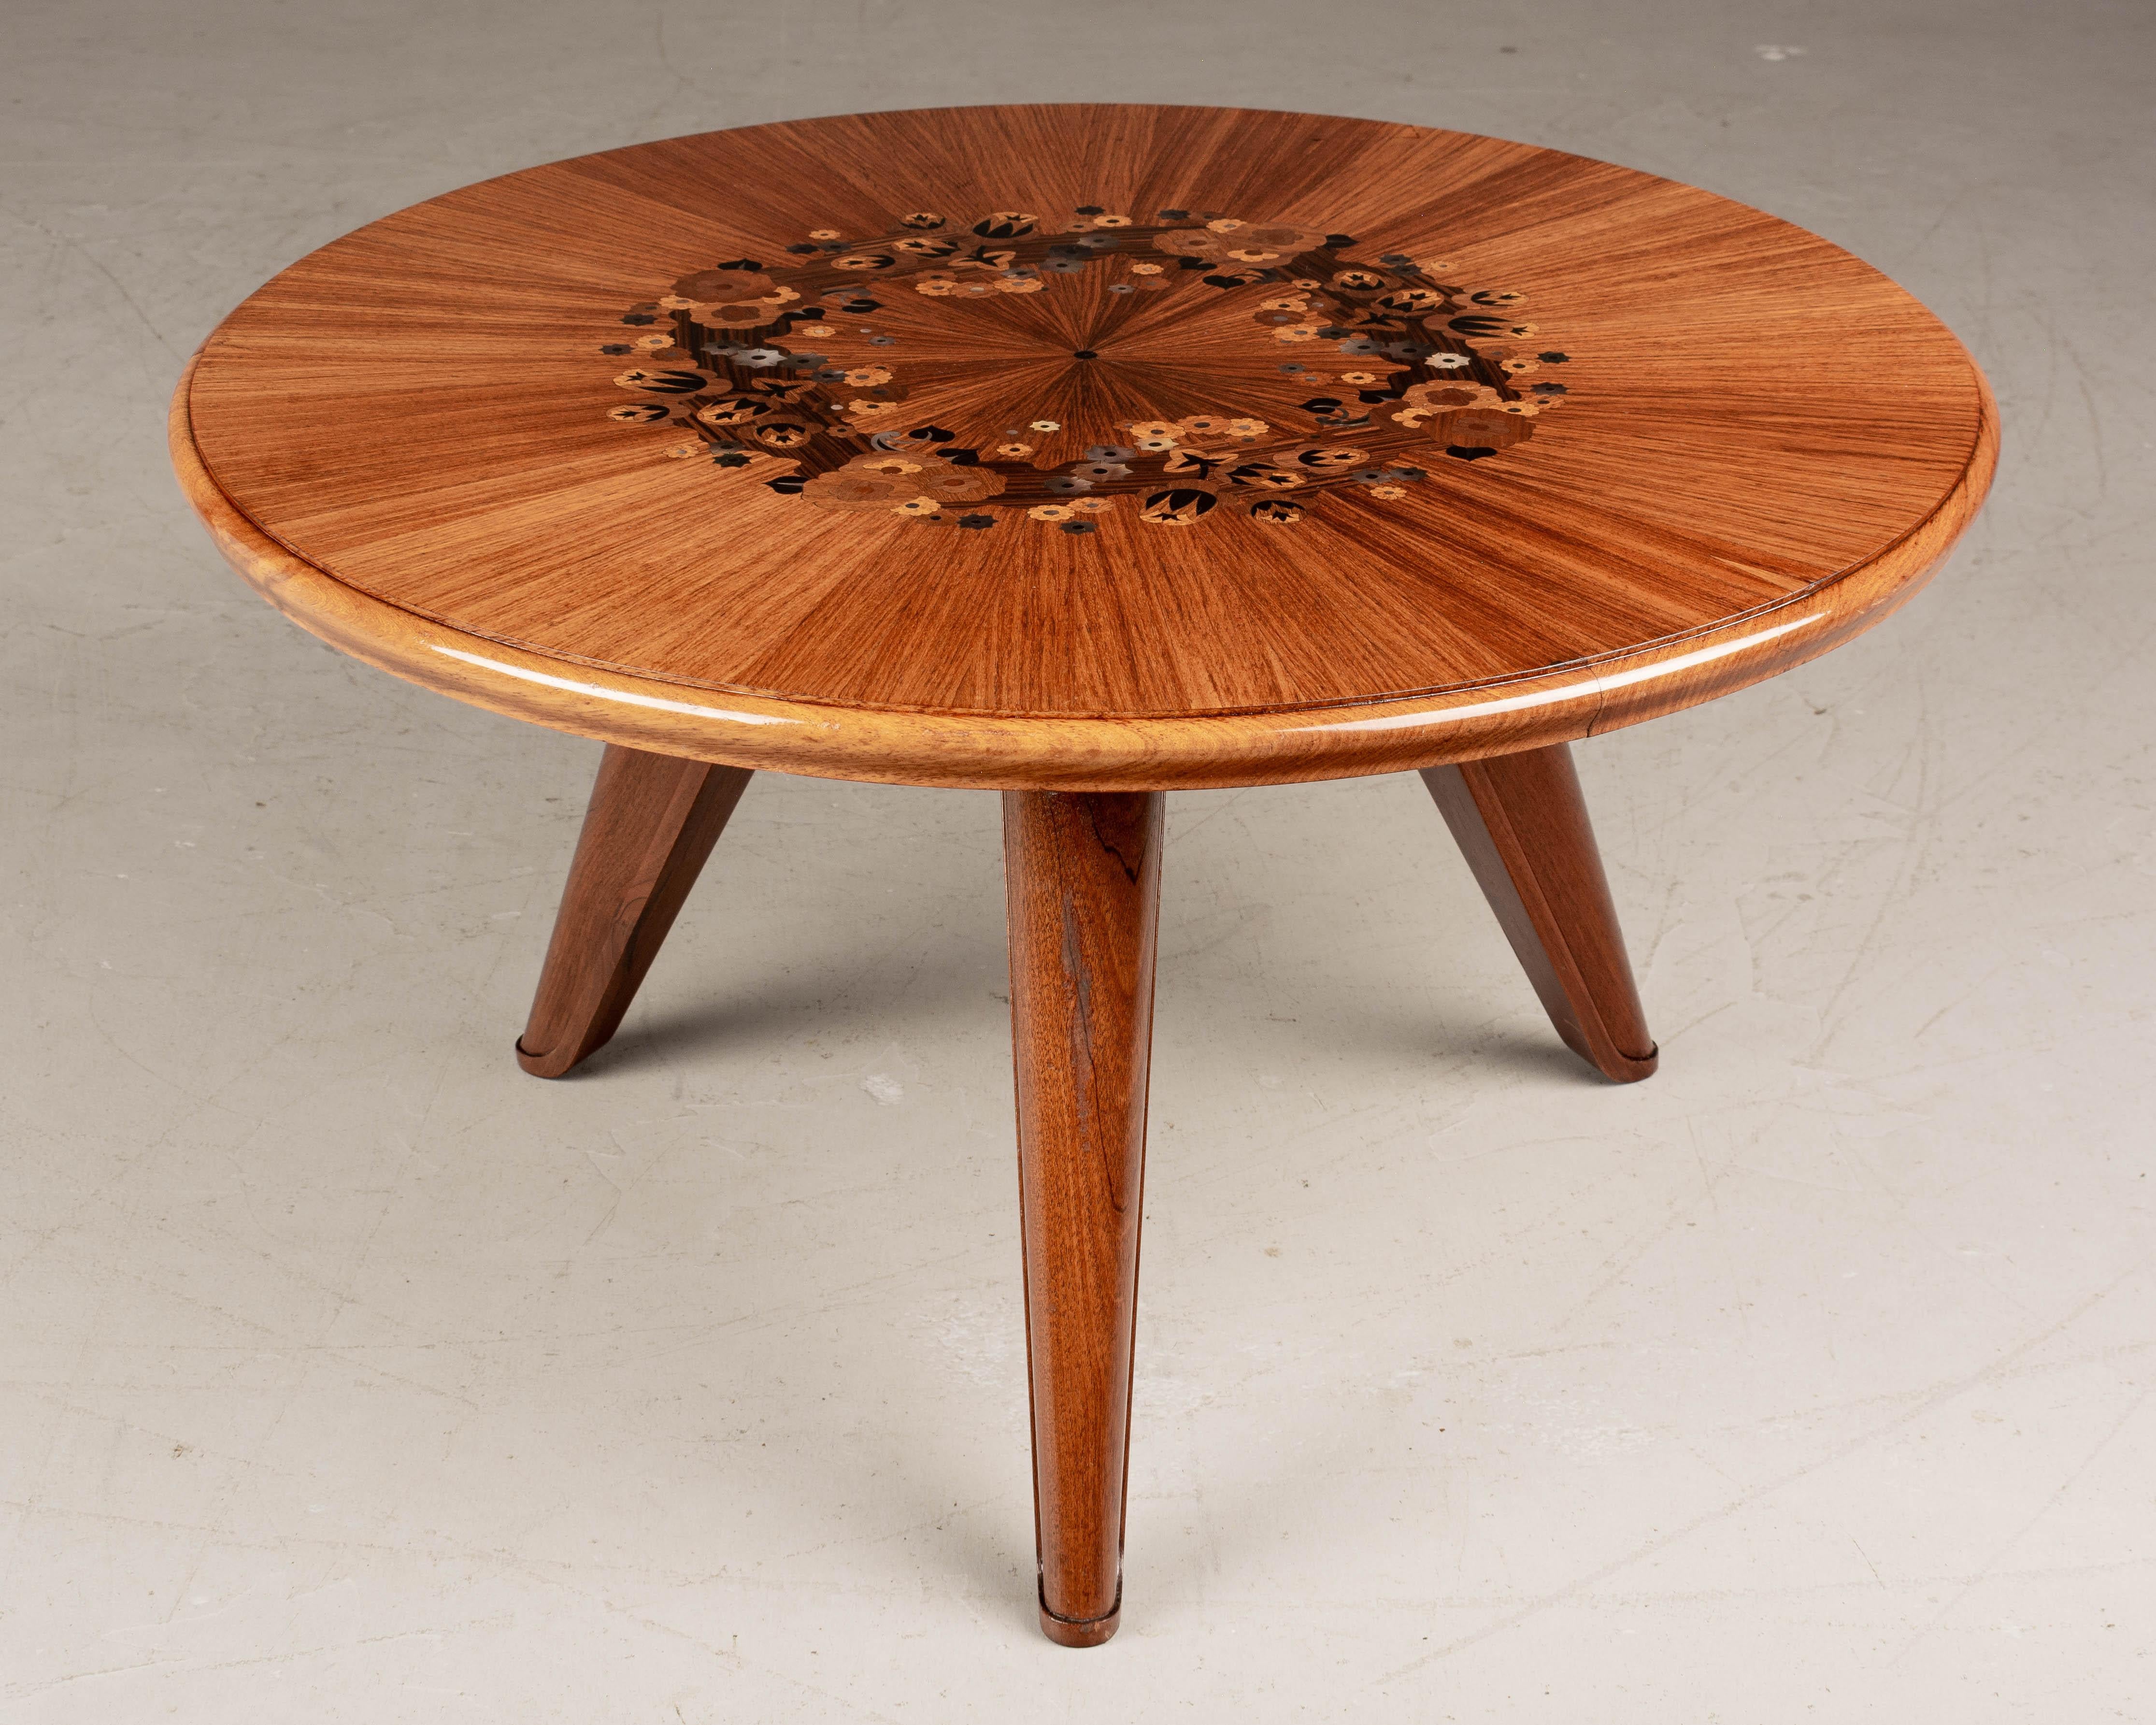 A small French Art Deco Jules Leleu attributed coffee or cocktail table. Stylized floral marquetry top with inlaid maccassar, rosewood, mother of pearl and satinwood. Resting on a sturdy mahogany tripod base. Exceptional quality and craftsmanship.